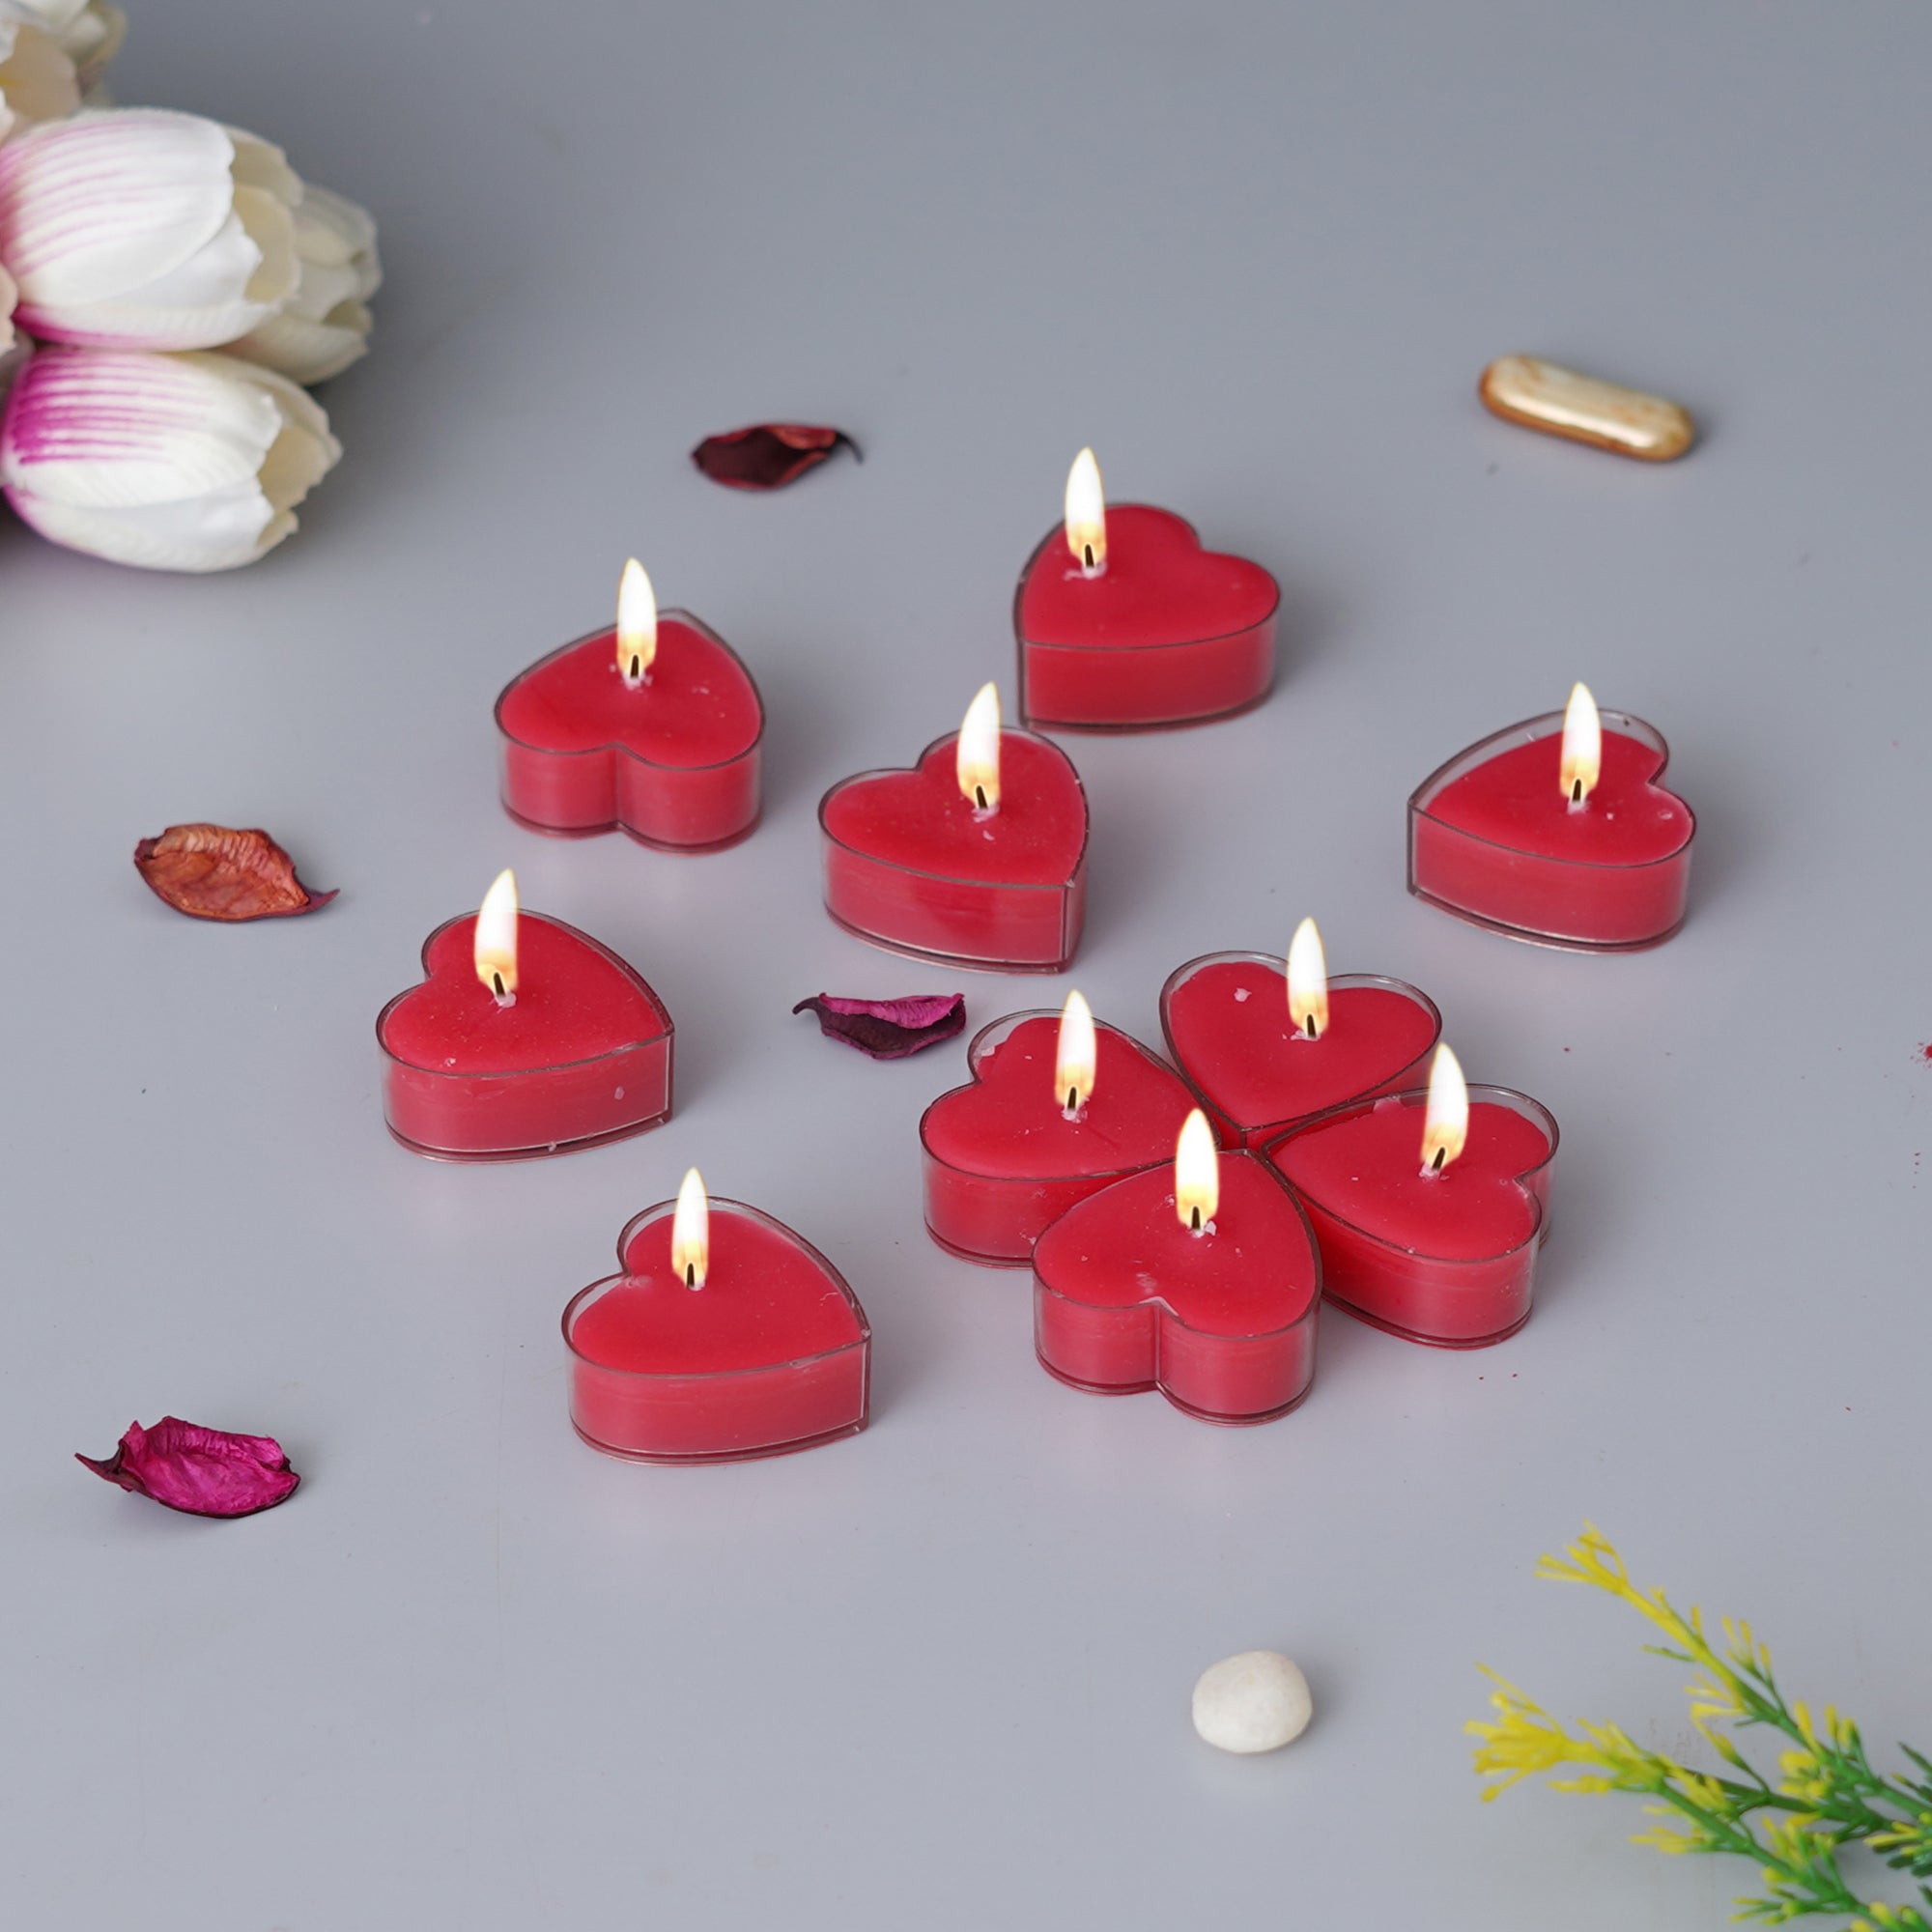 Set Of 10 Romantic Heart Shaped Rose Scented Tea Light Candles